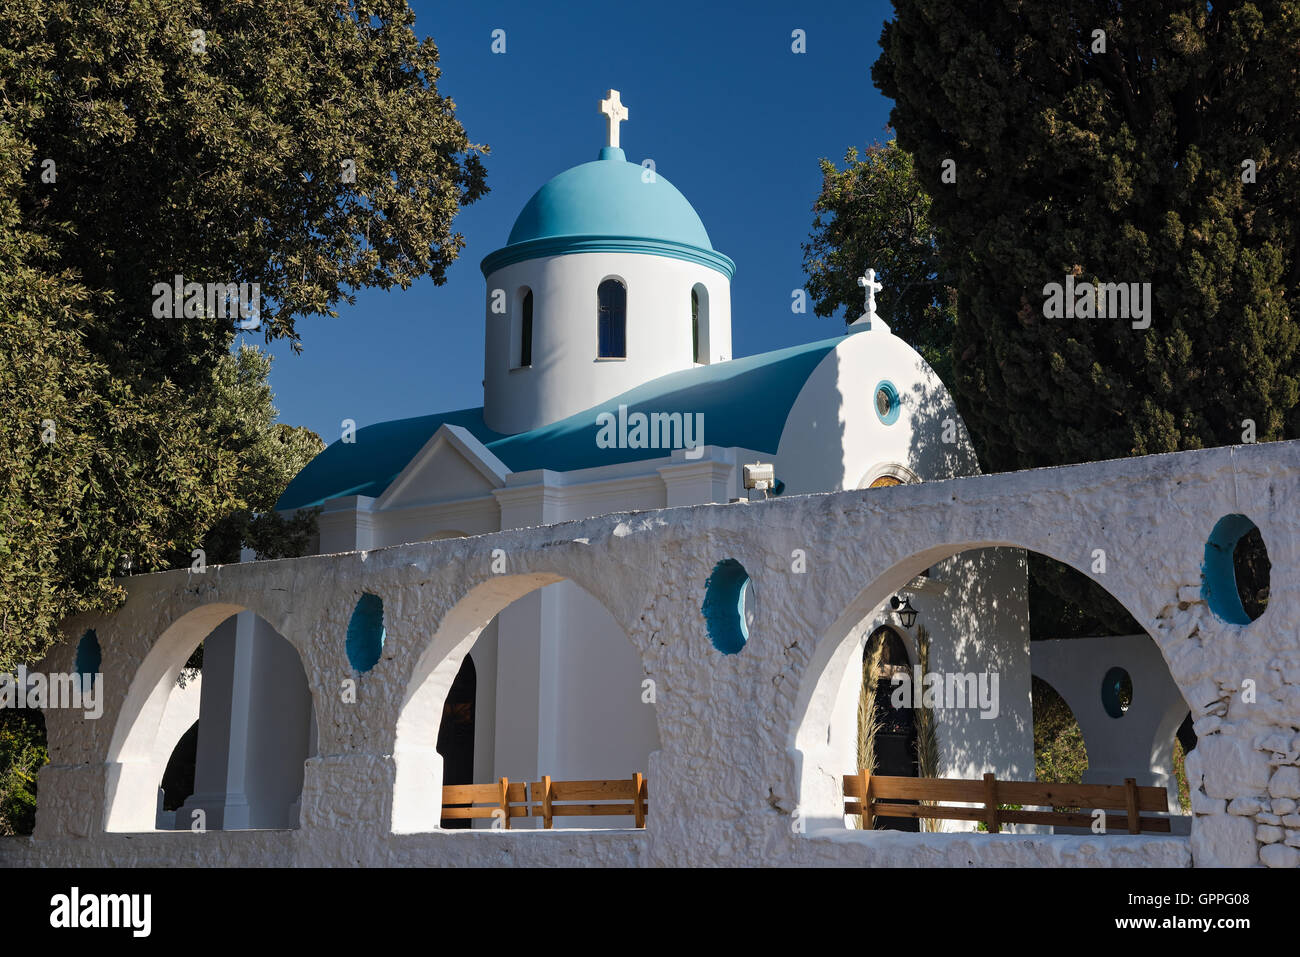 Traditionelle Kirchlein in Insel Kos, Griechenland Stockfoto